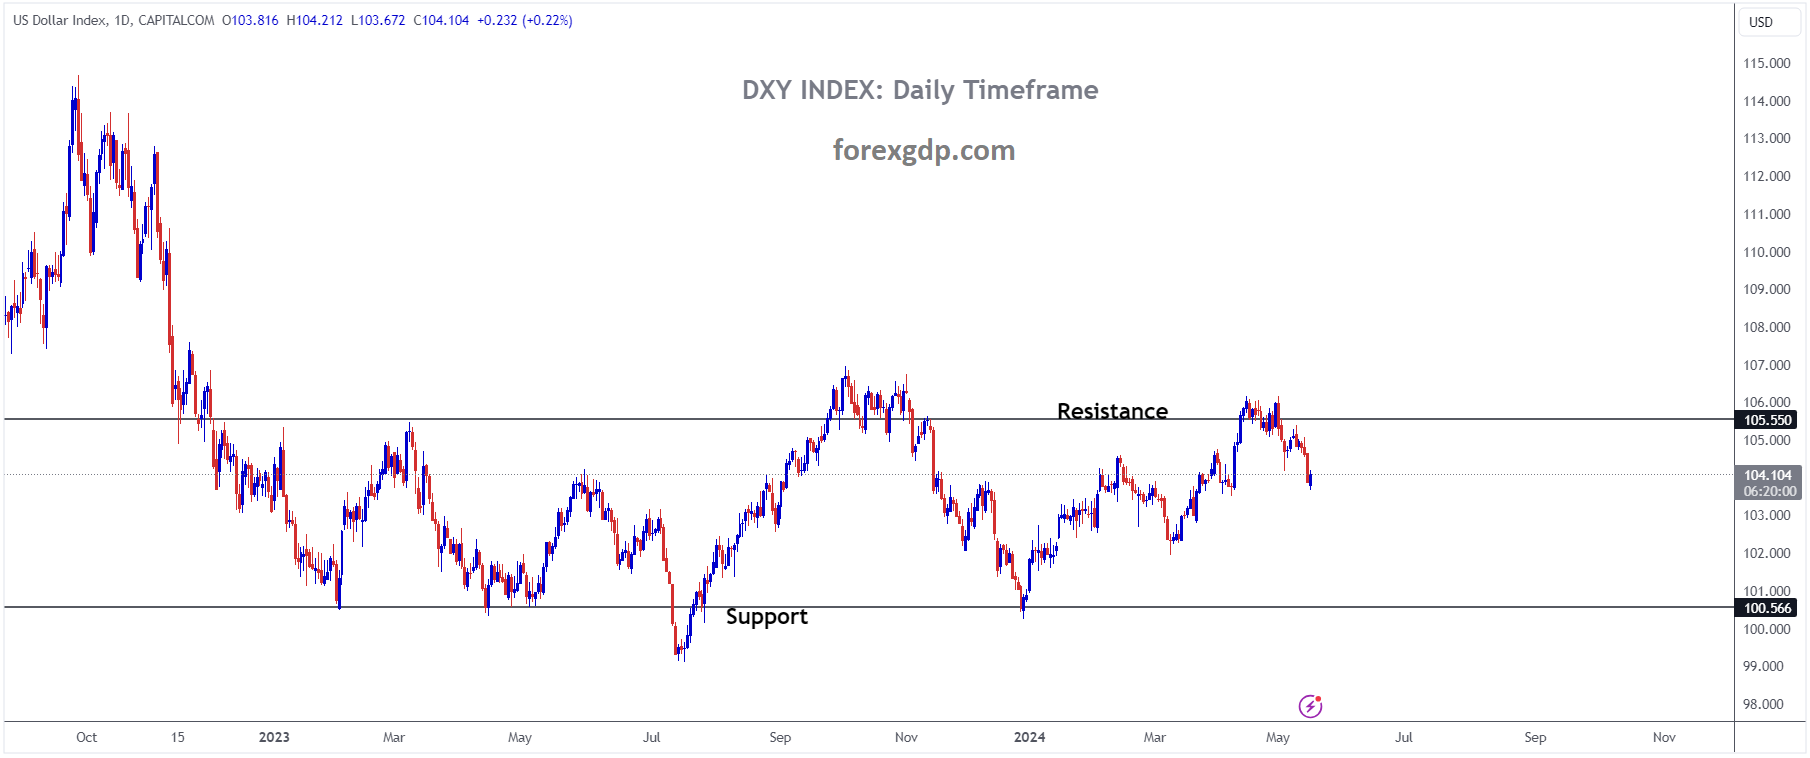 USD Index market price is moving in box pattern and market has fallen from the resistance area of the pattern